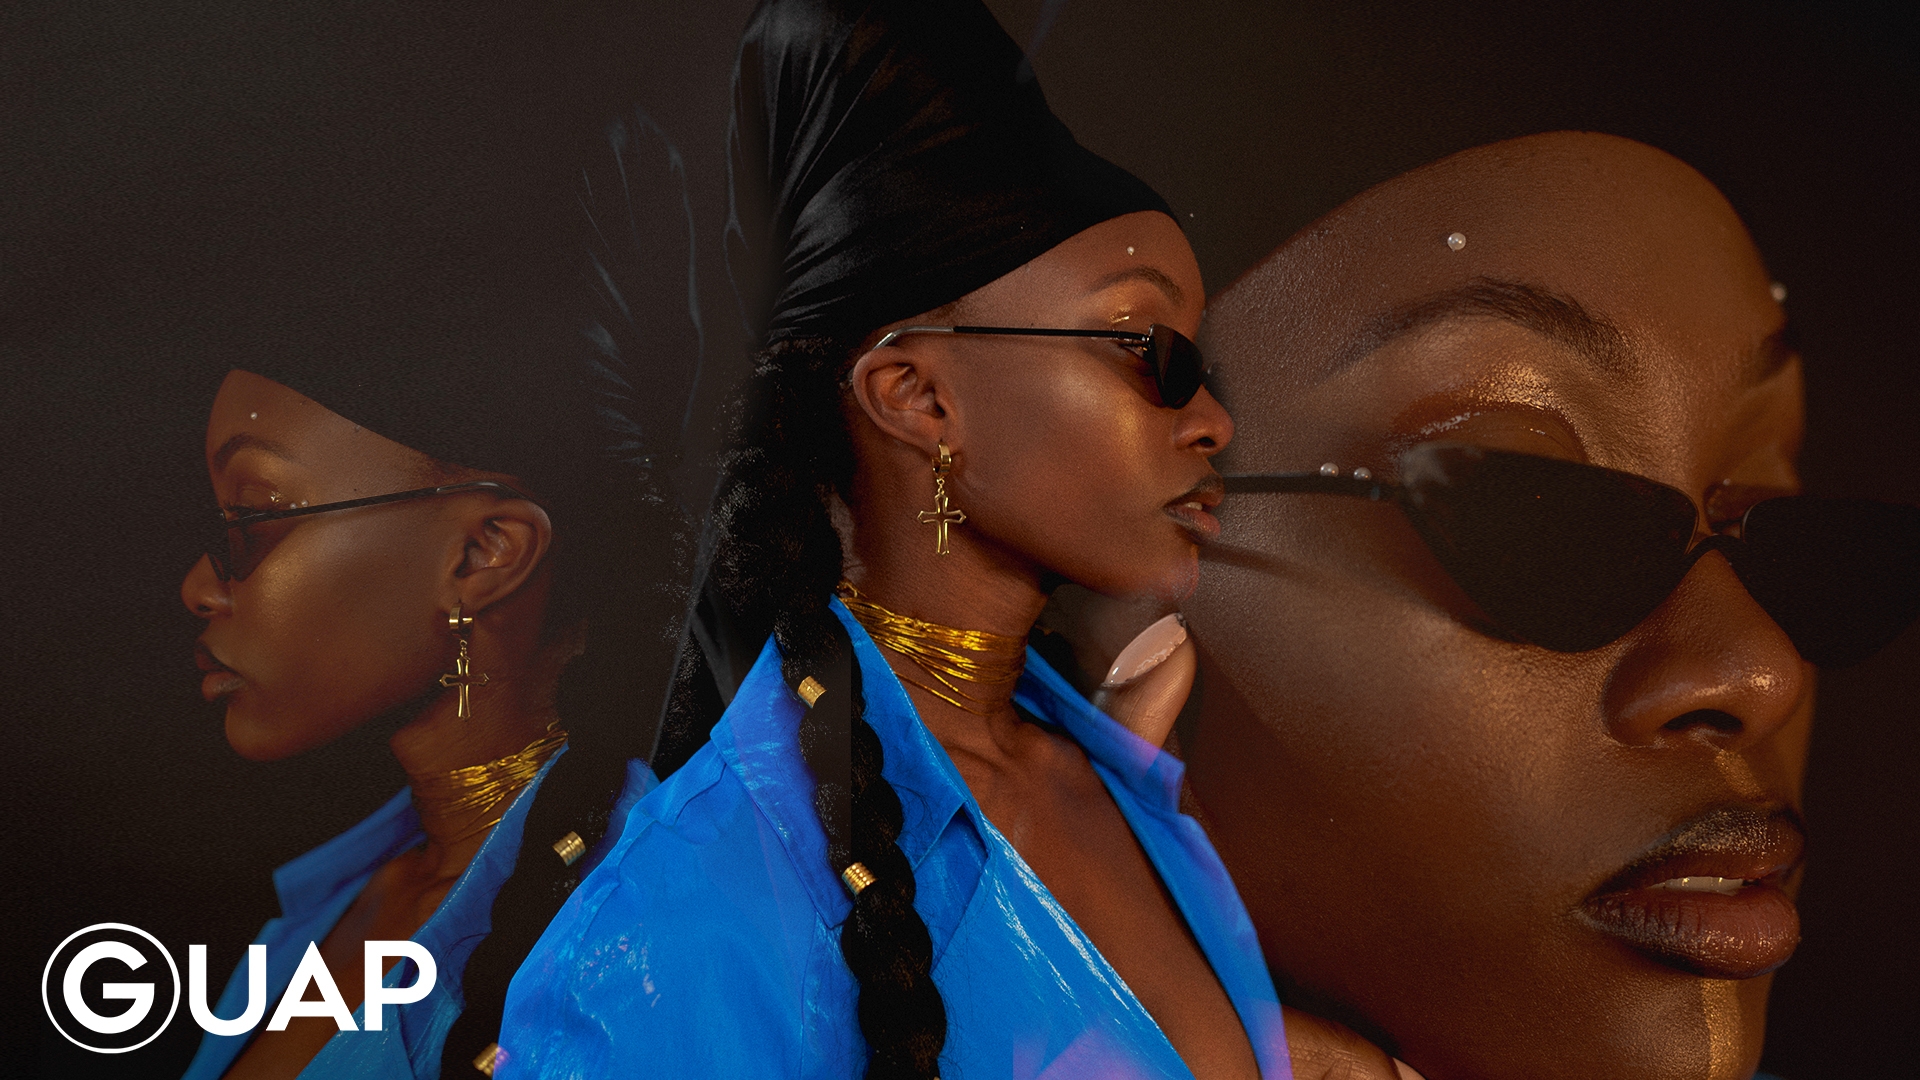 Our Latest Fashion Editorial Will Transport You To A New Afro-futuristic World | BFS